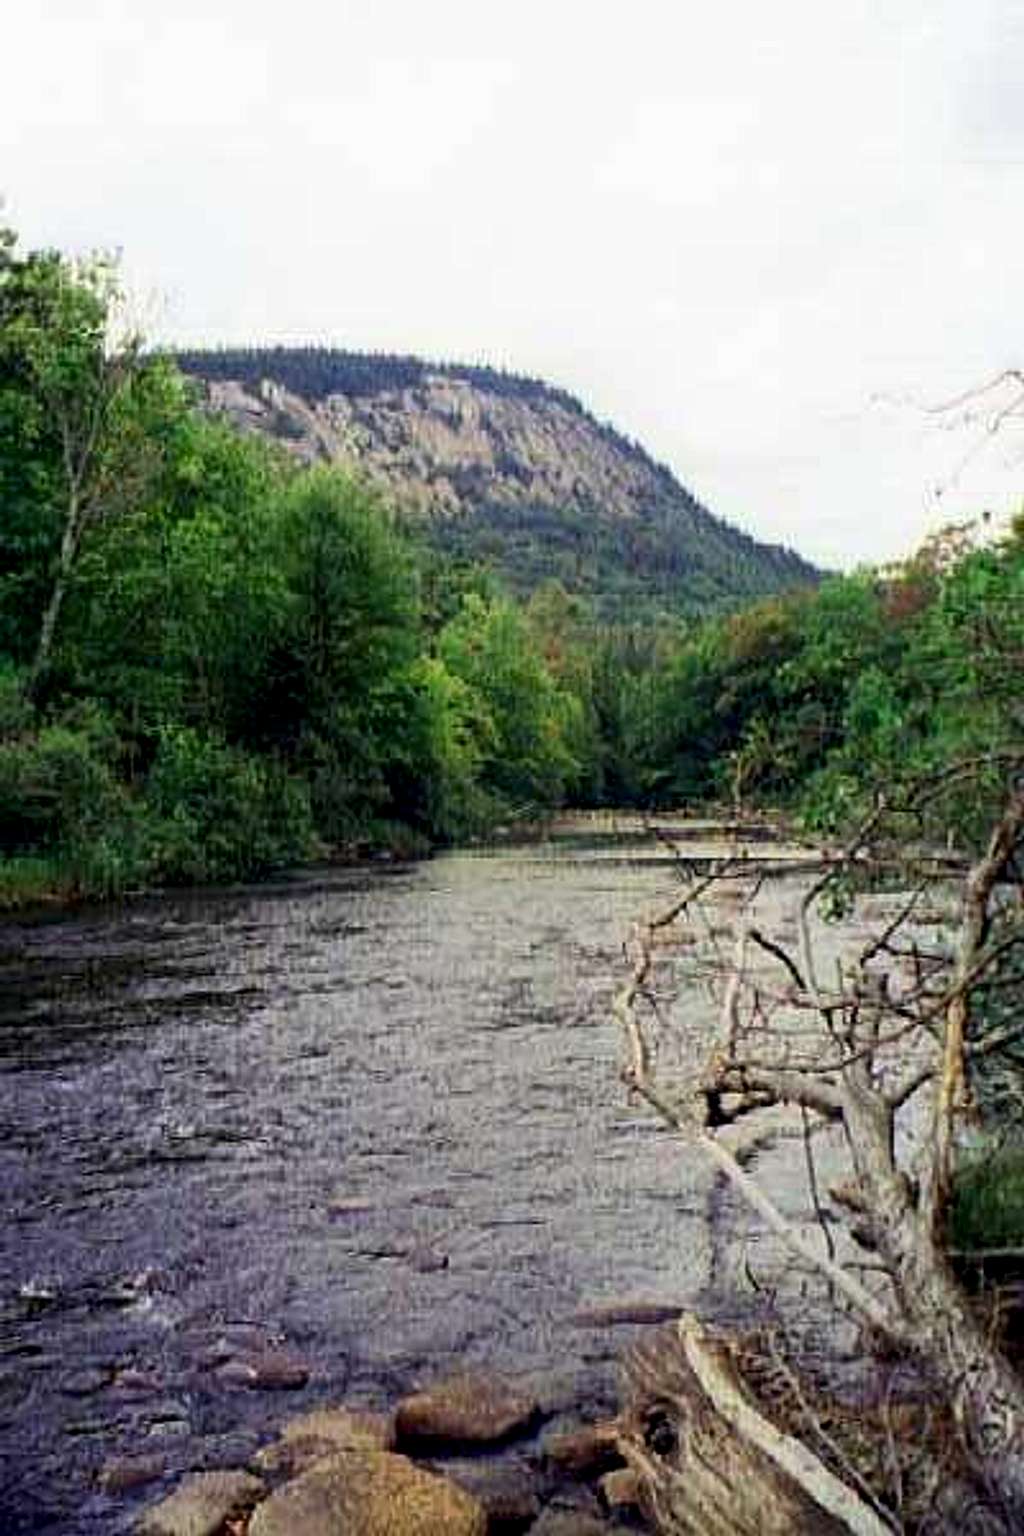 Sugarloaf Mtn. from the Cedar River